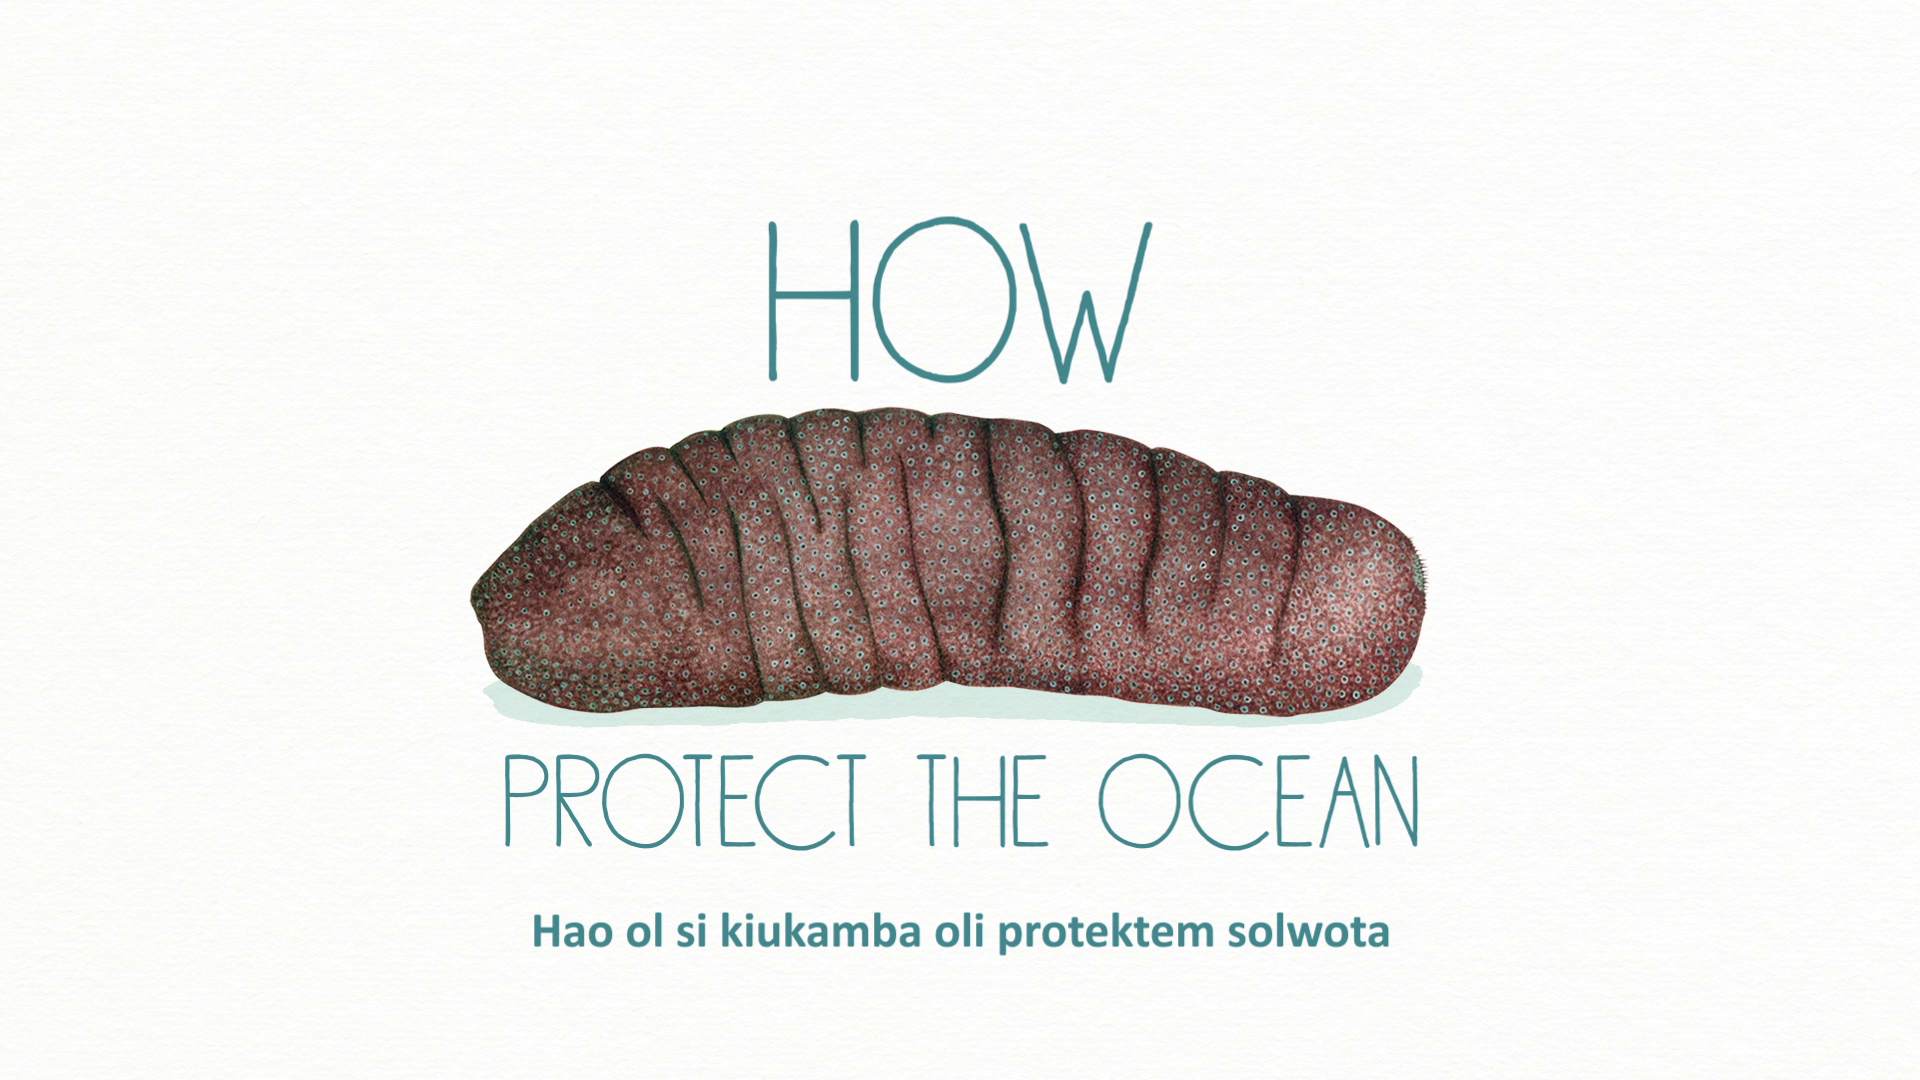 The Fisher's Tales 02 (Bislama): Do you know how sea cucumbers protect the ocean?